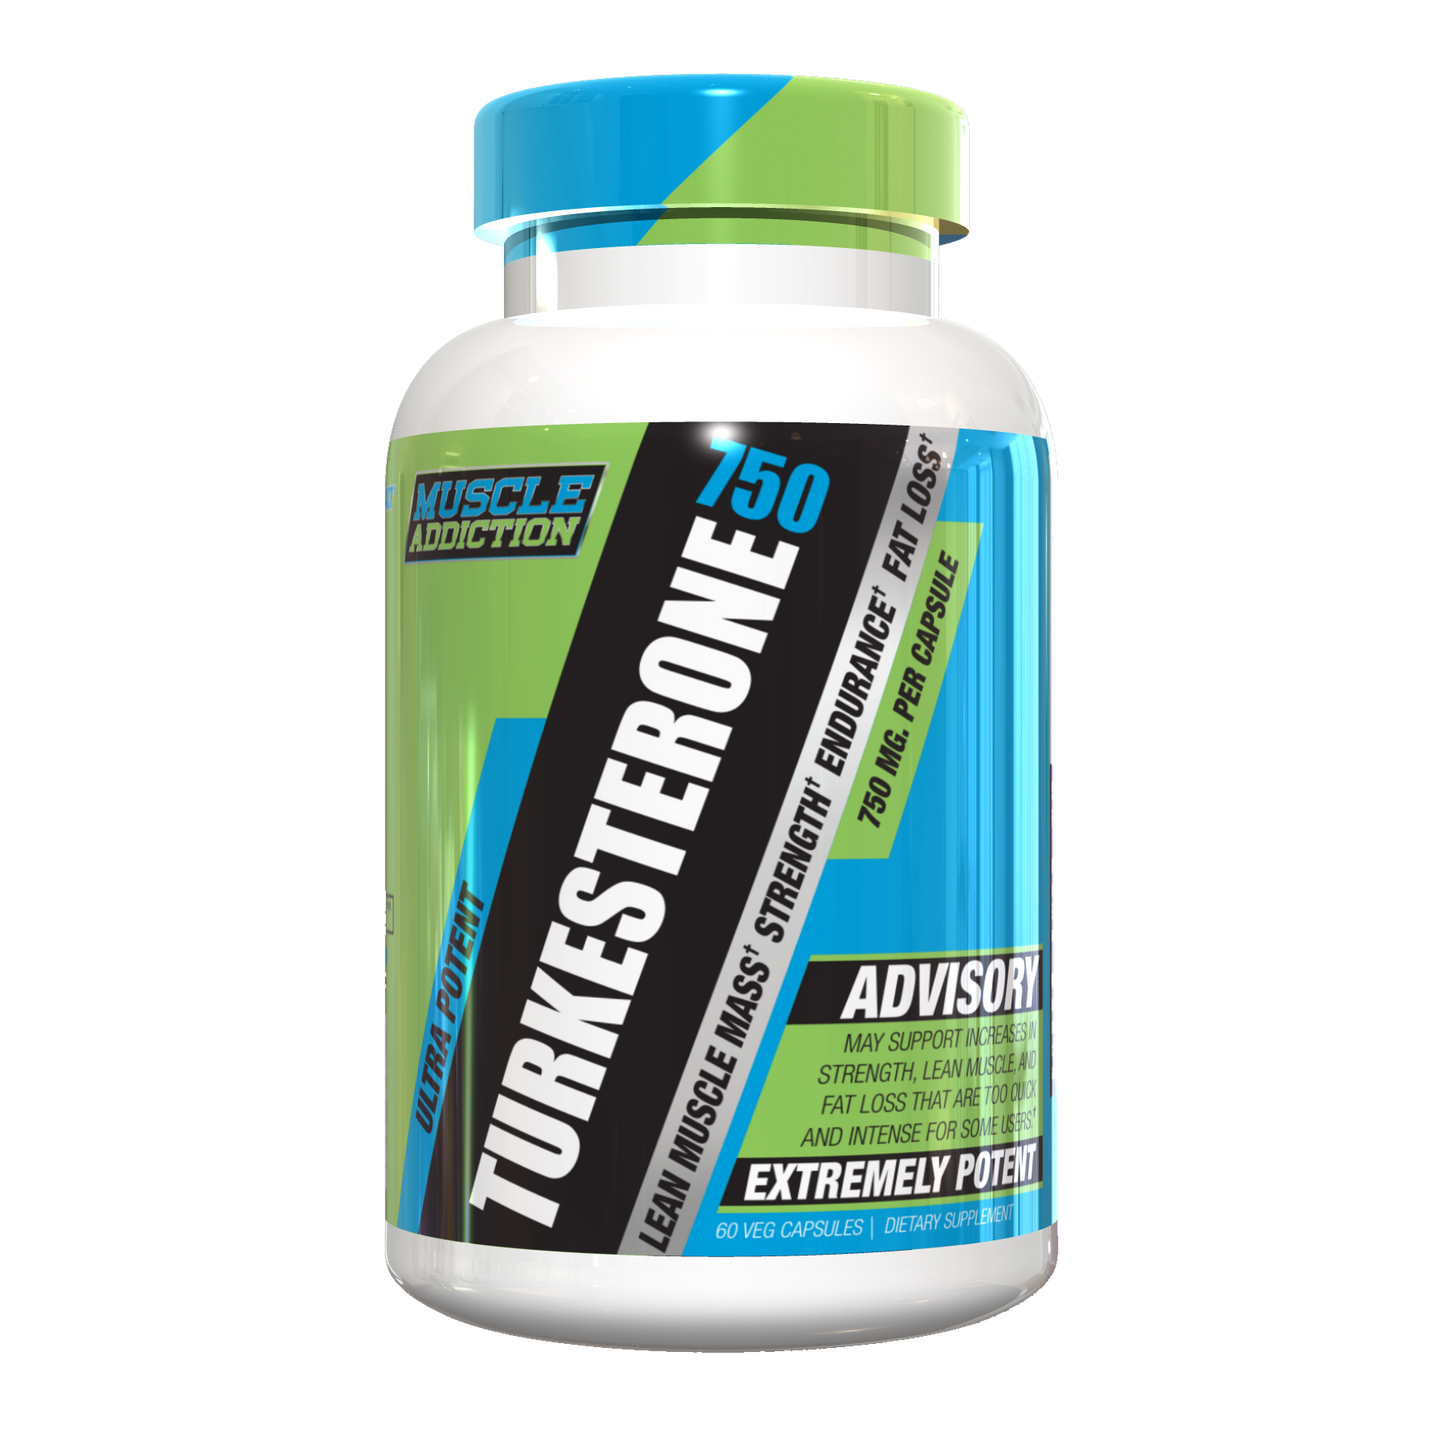 Muscle Addiction Turkesterone 750 - A1 Supplements Store